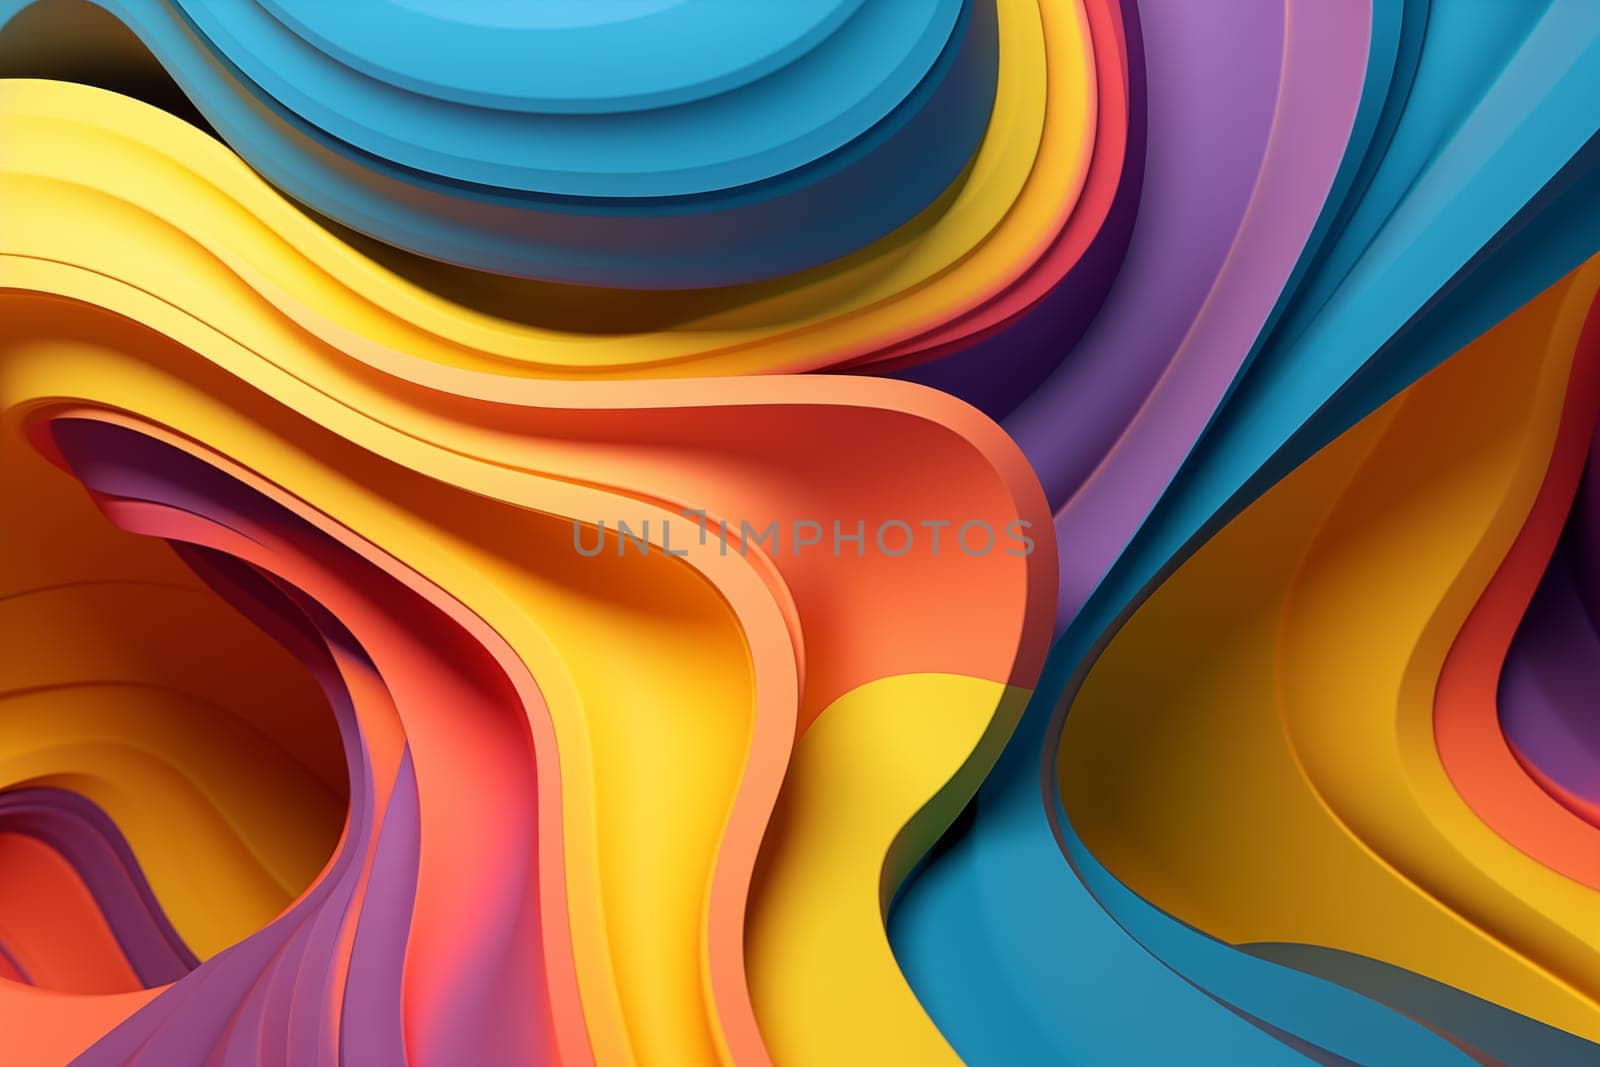 An abstract image of multicolored, wave-like folds resembling layered paper or fabric, creating a visual effect of fluid motion.